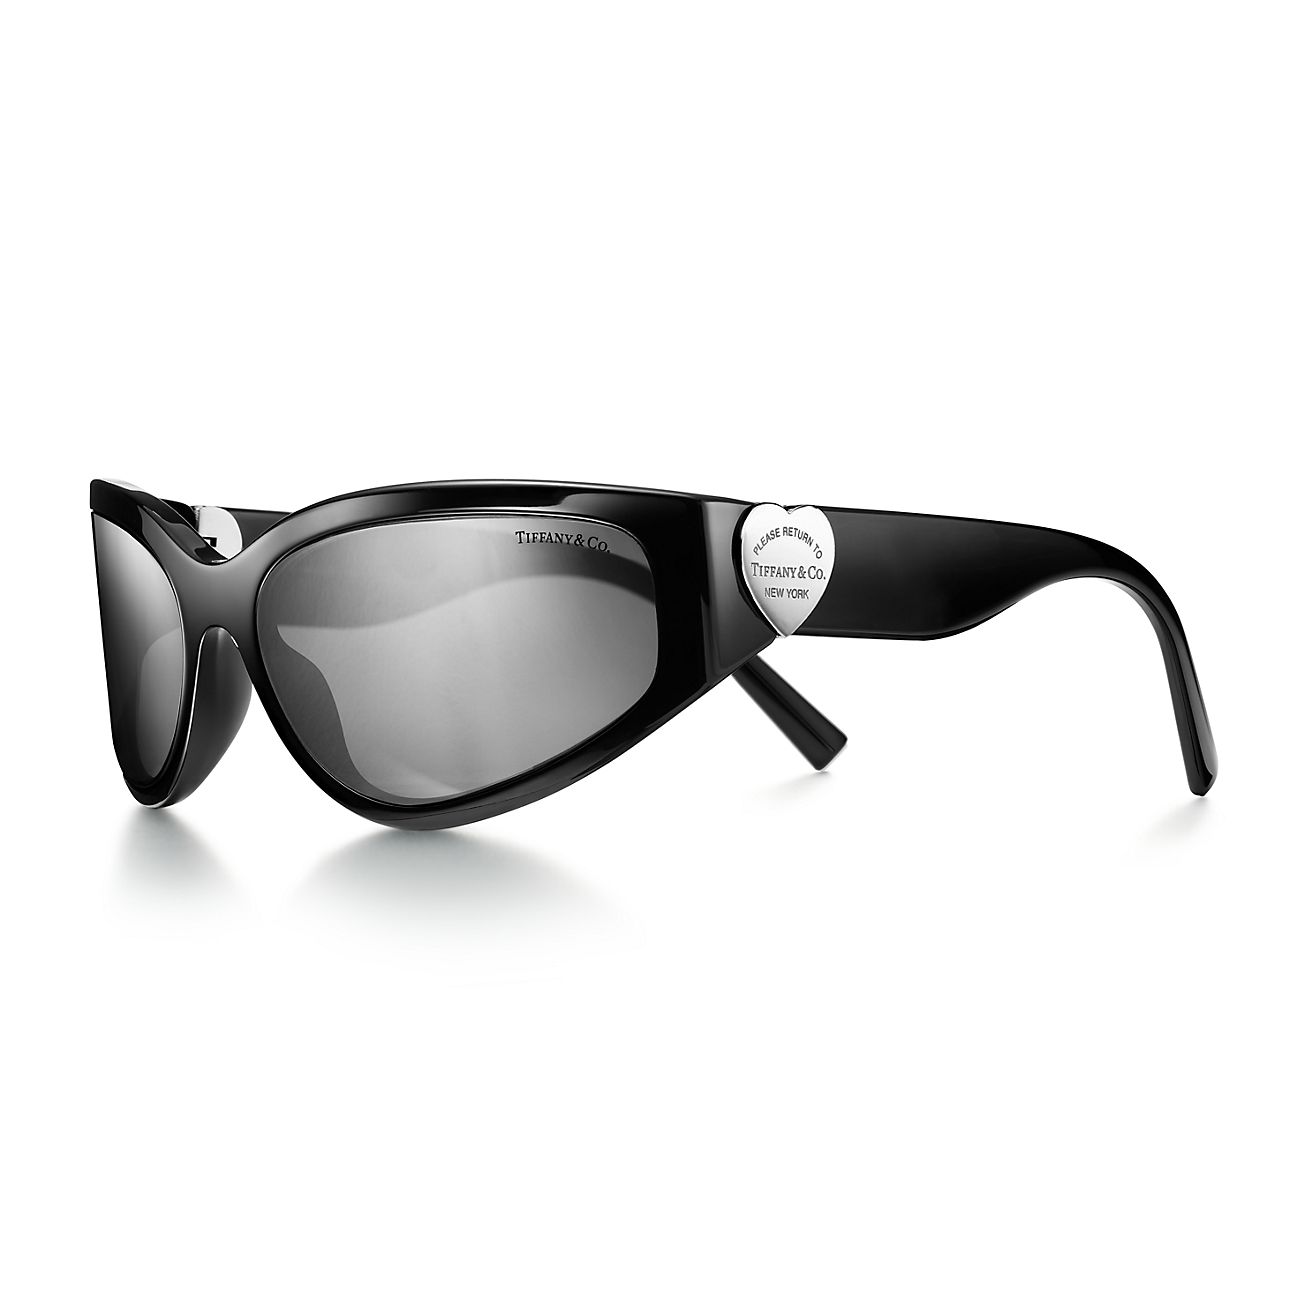 Return to Tiffany™ Sunglasses in Black Acetate with Grey Mirrored ...